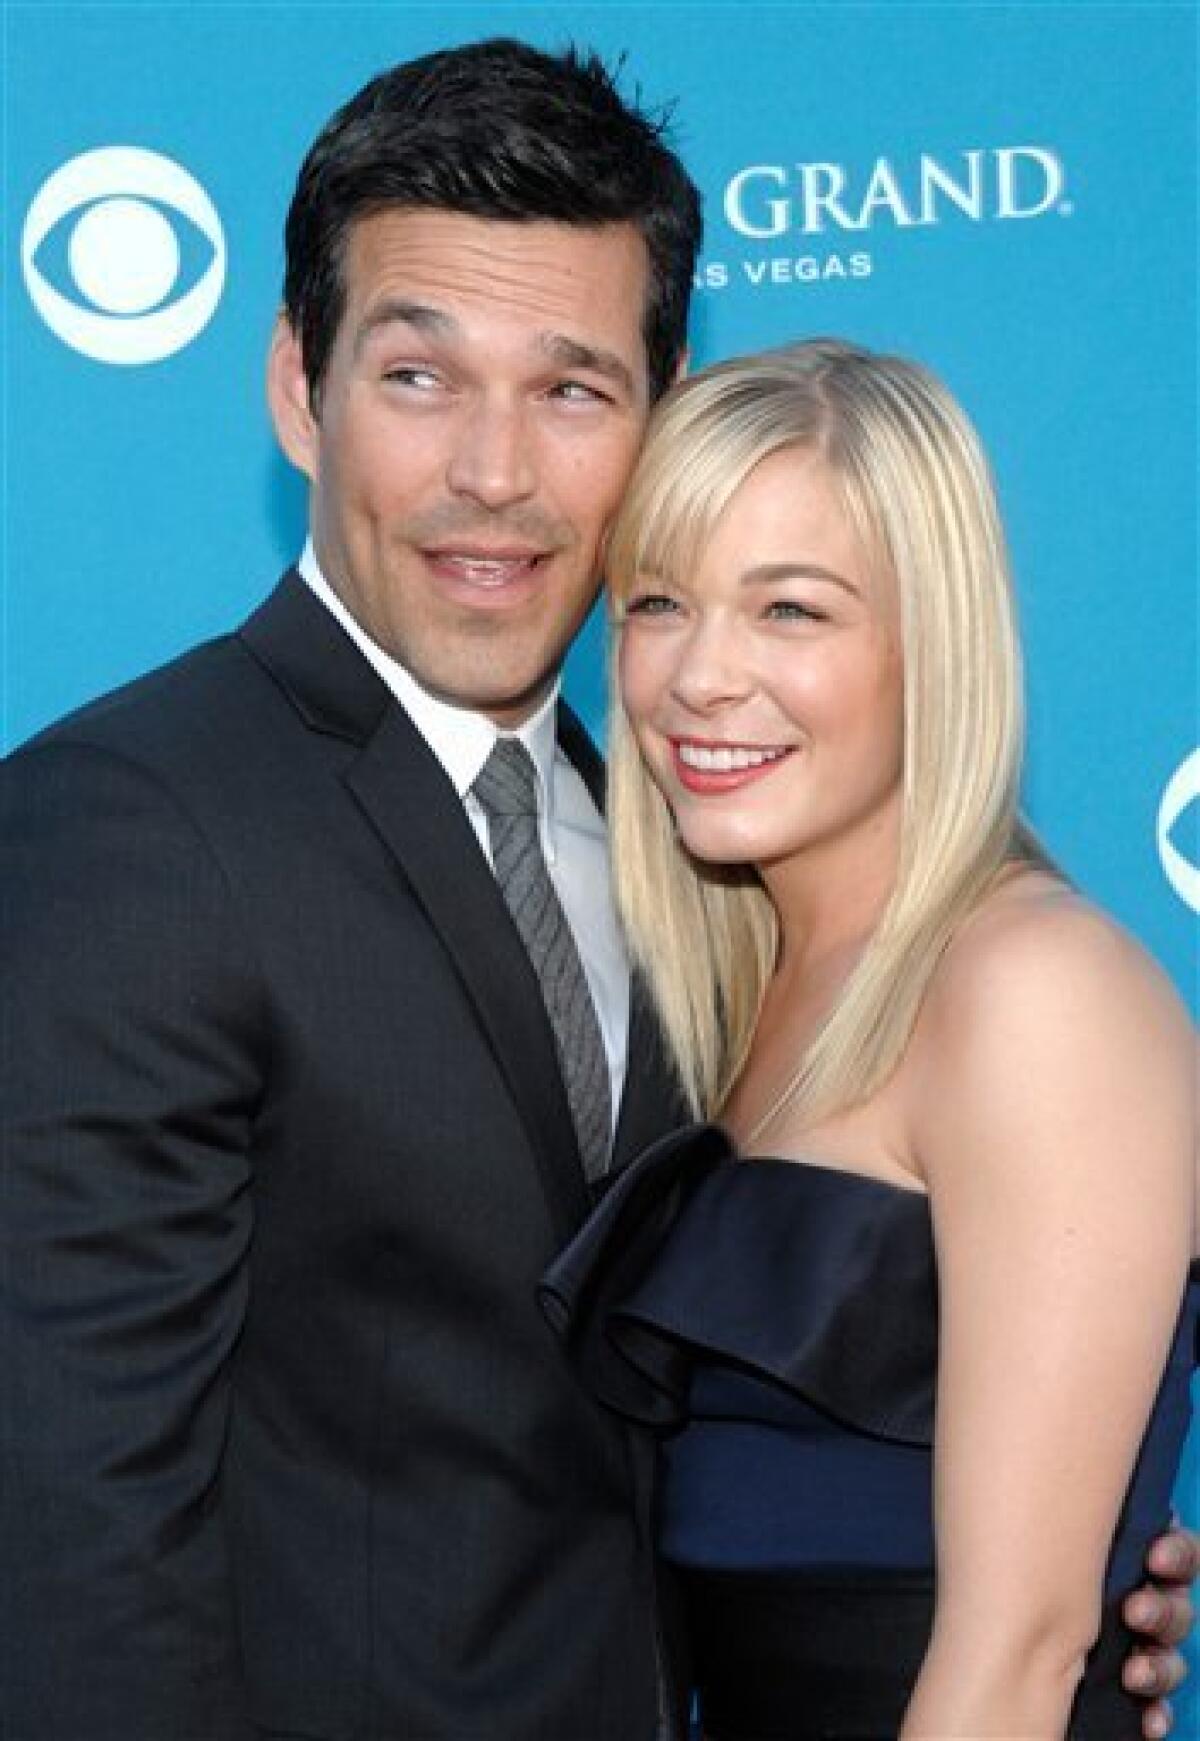 FILE - In this April 18, 2010 file photo, country singer LeAnn Rimes, right, and actor Eddie Cibrian arrive at the 45th Annual Academy of Country Music Awards in Las Vegas. (AP Photo/Dan Steinberg, file)